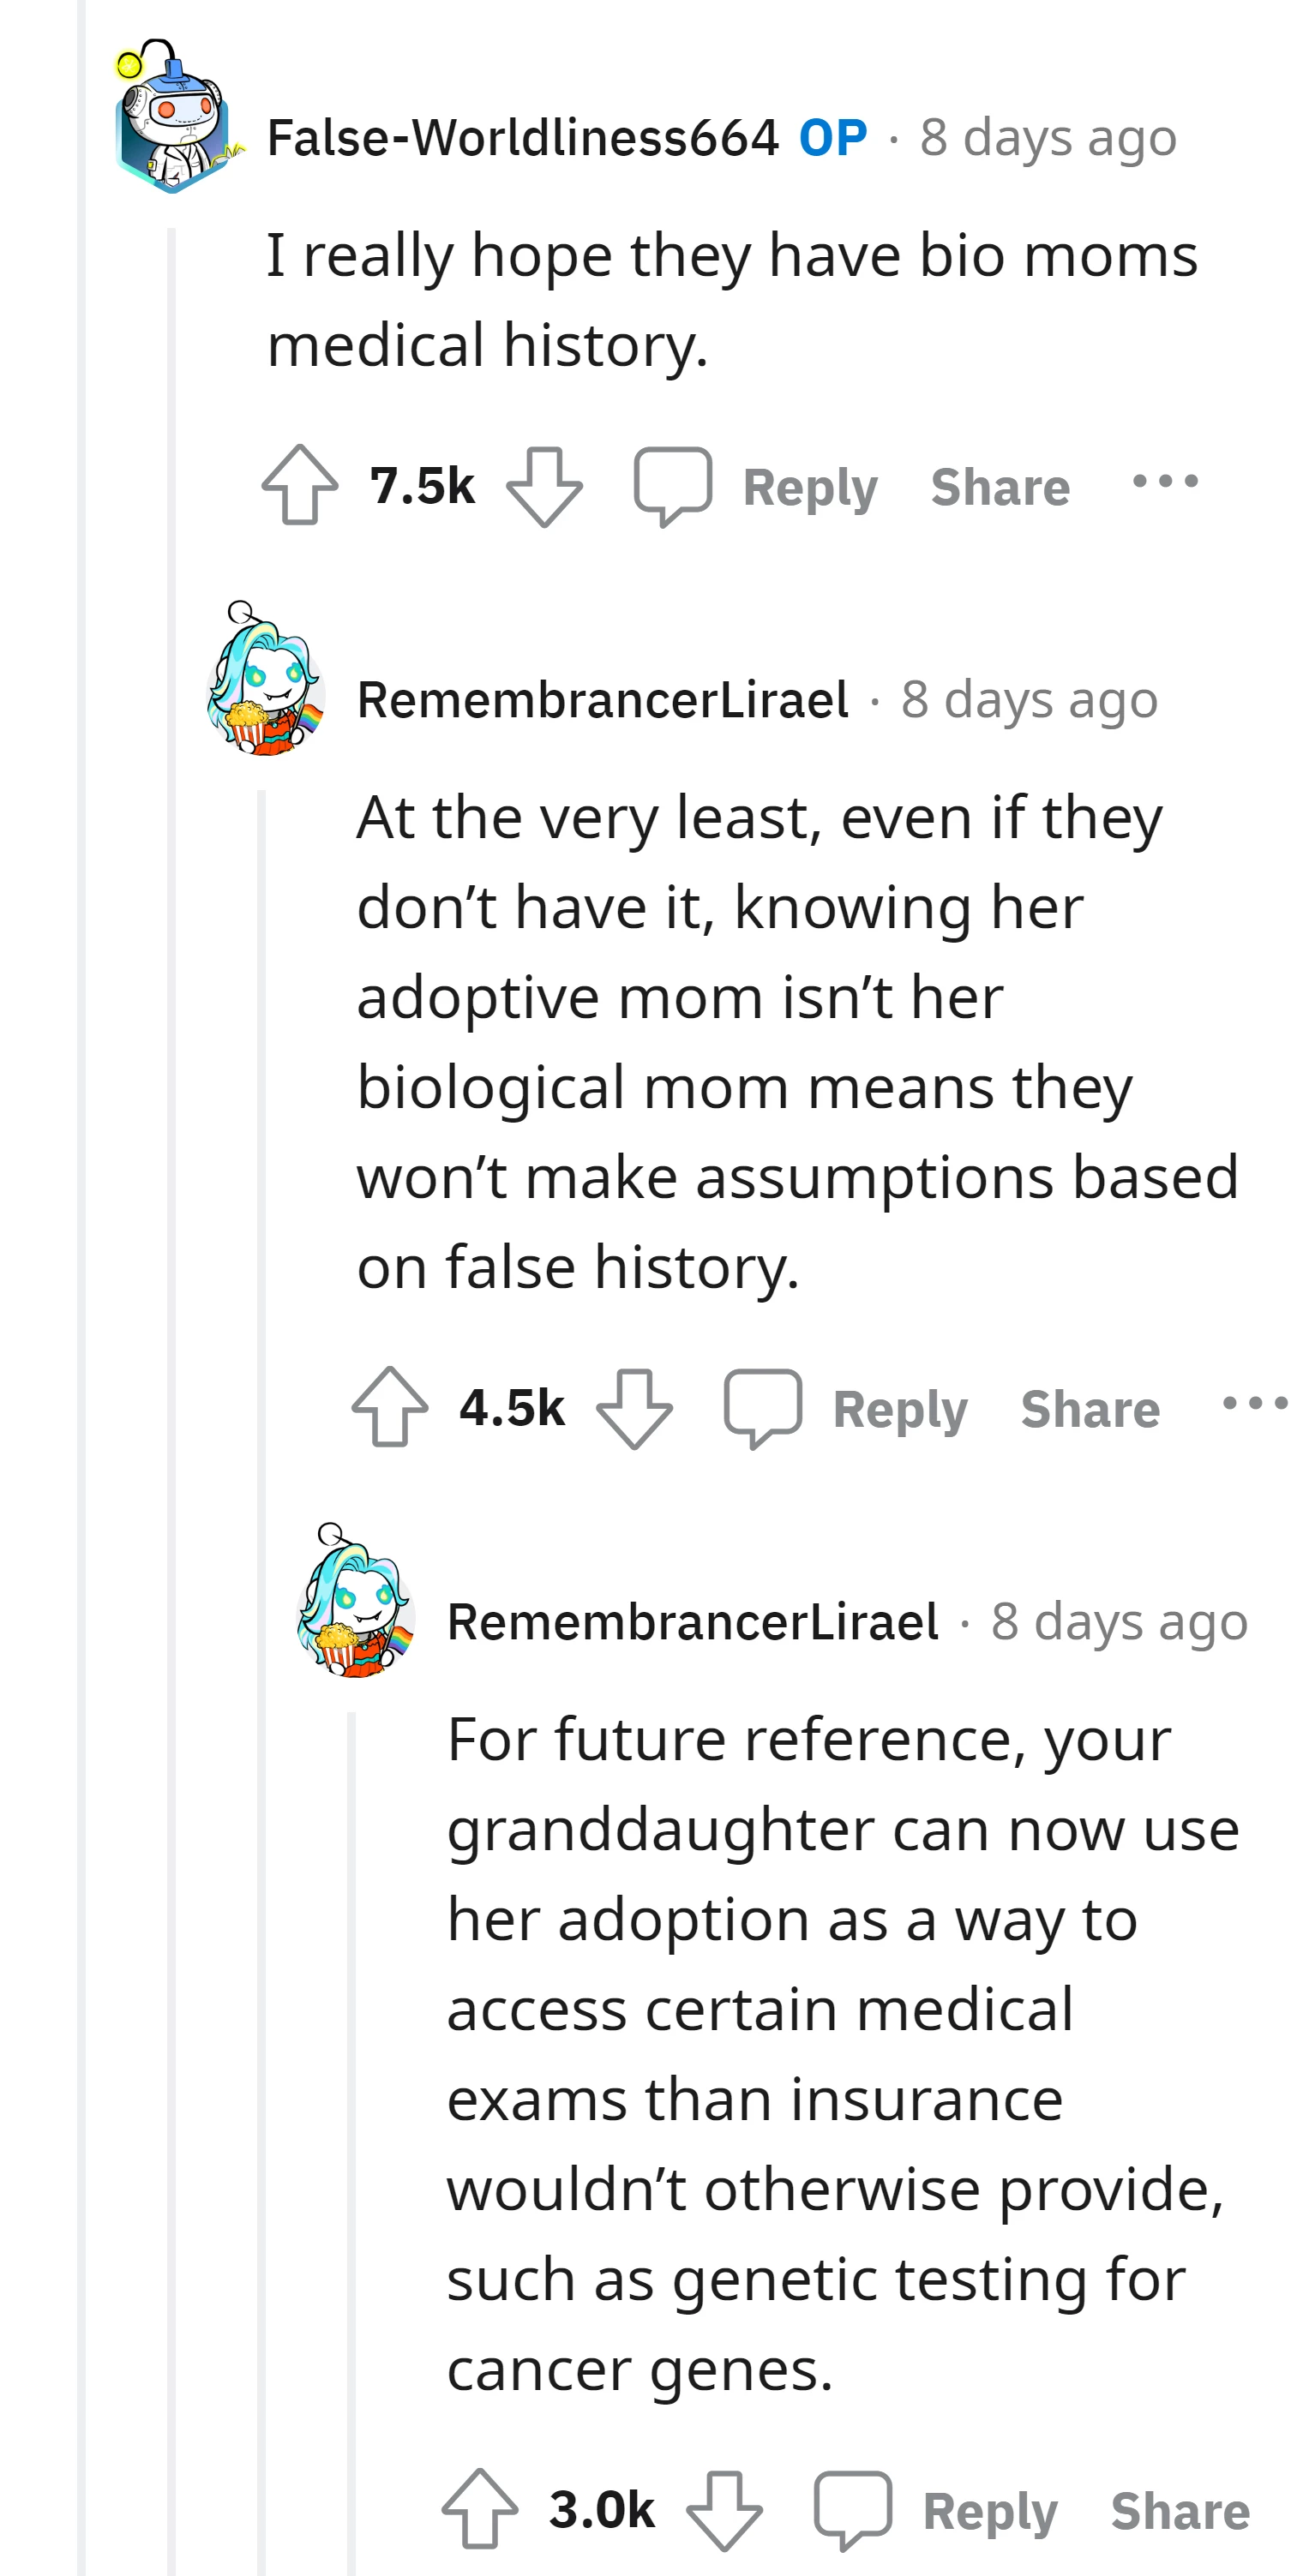 Commenter expresses hope that the adoptive family has the biological mother's medical history